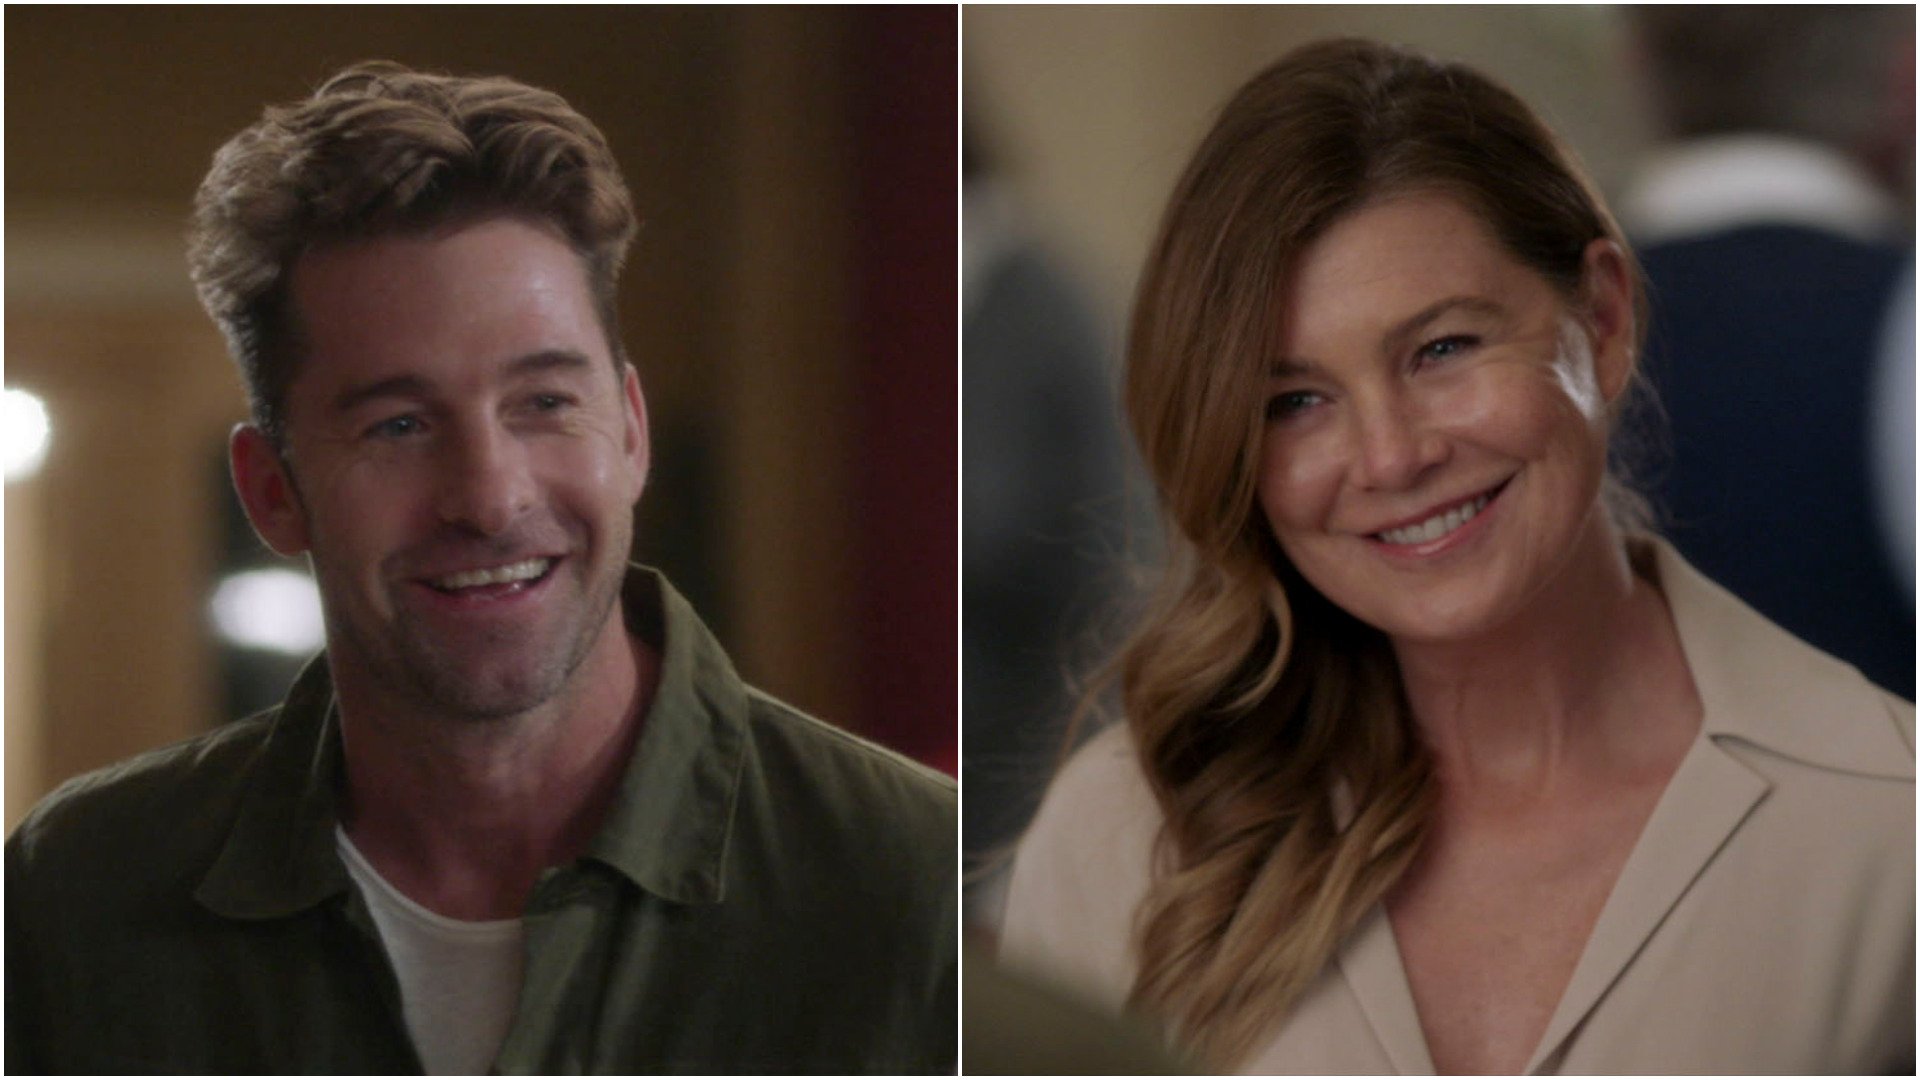 ‘Grey’s Anatomy’ Fans Don’t Believe Nick Marsh and Meredith Grey’s Romance in Season 18